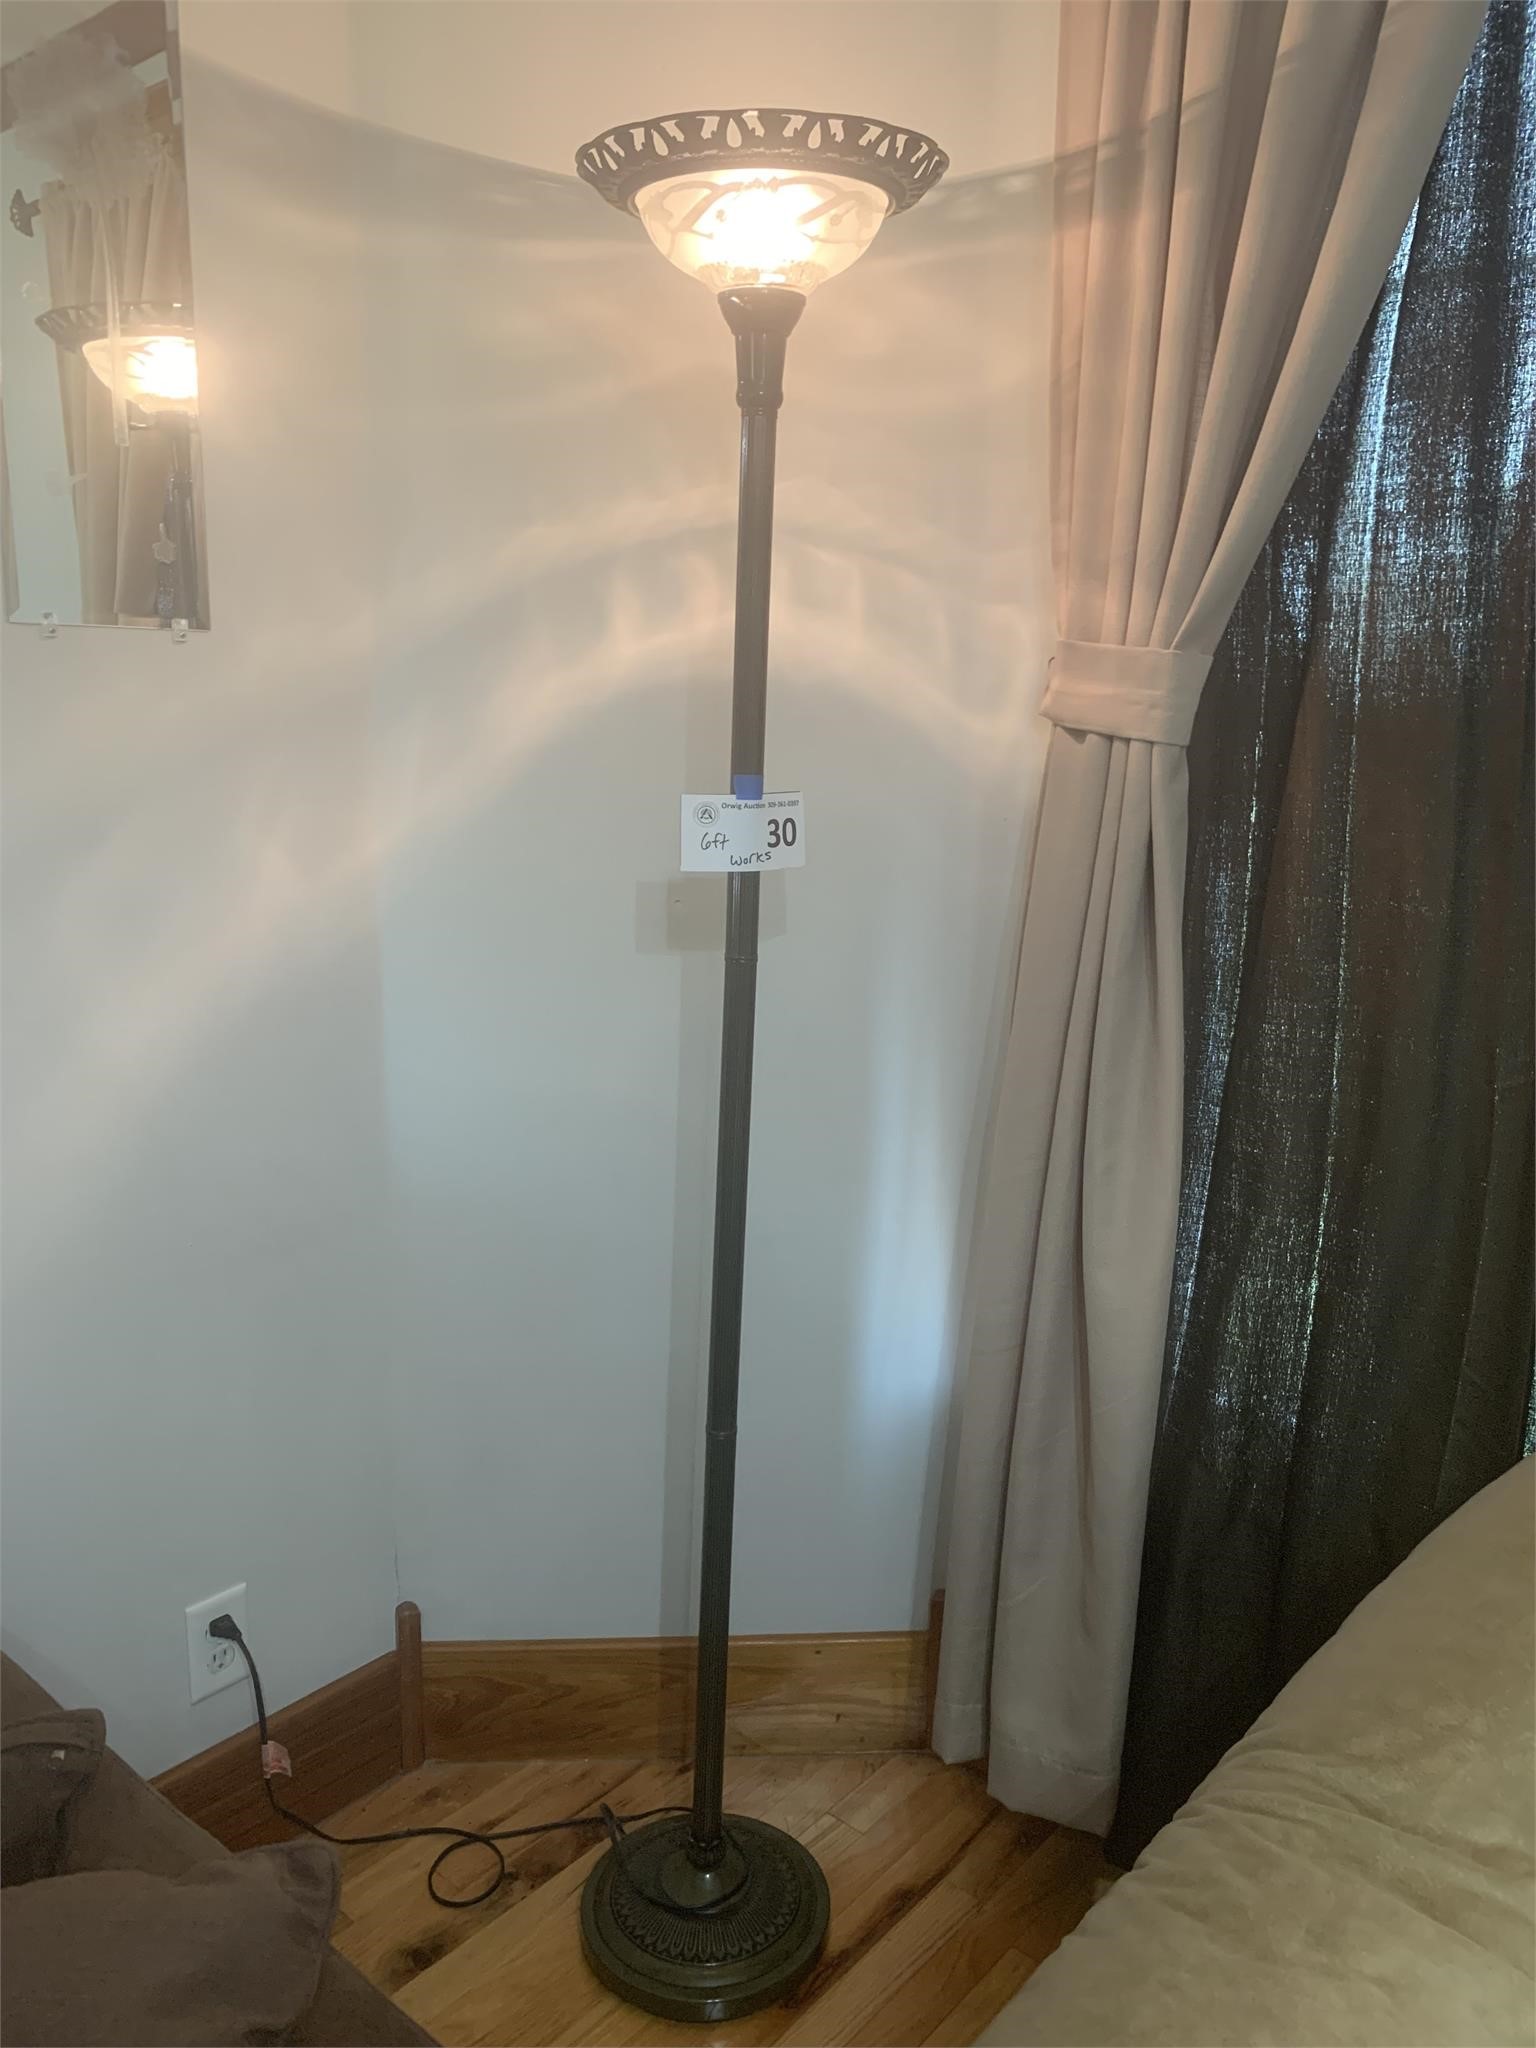 6ft Tall Lamp (Works)